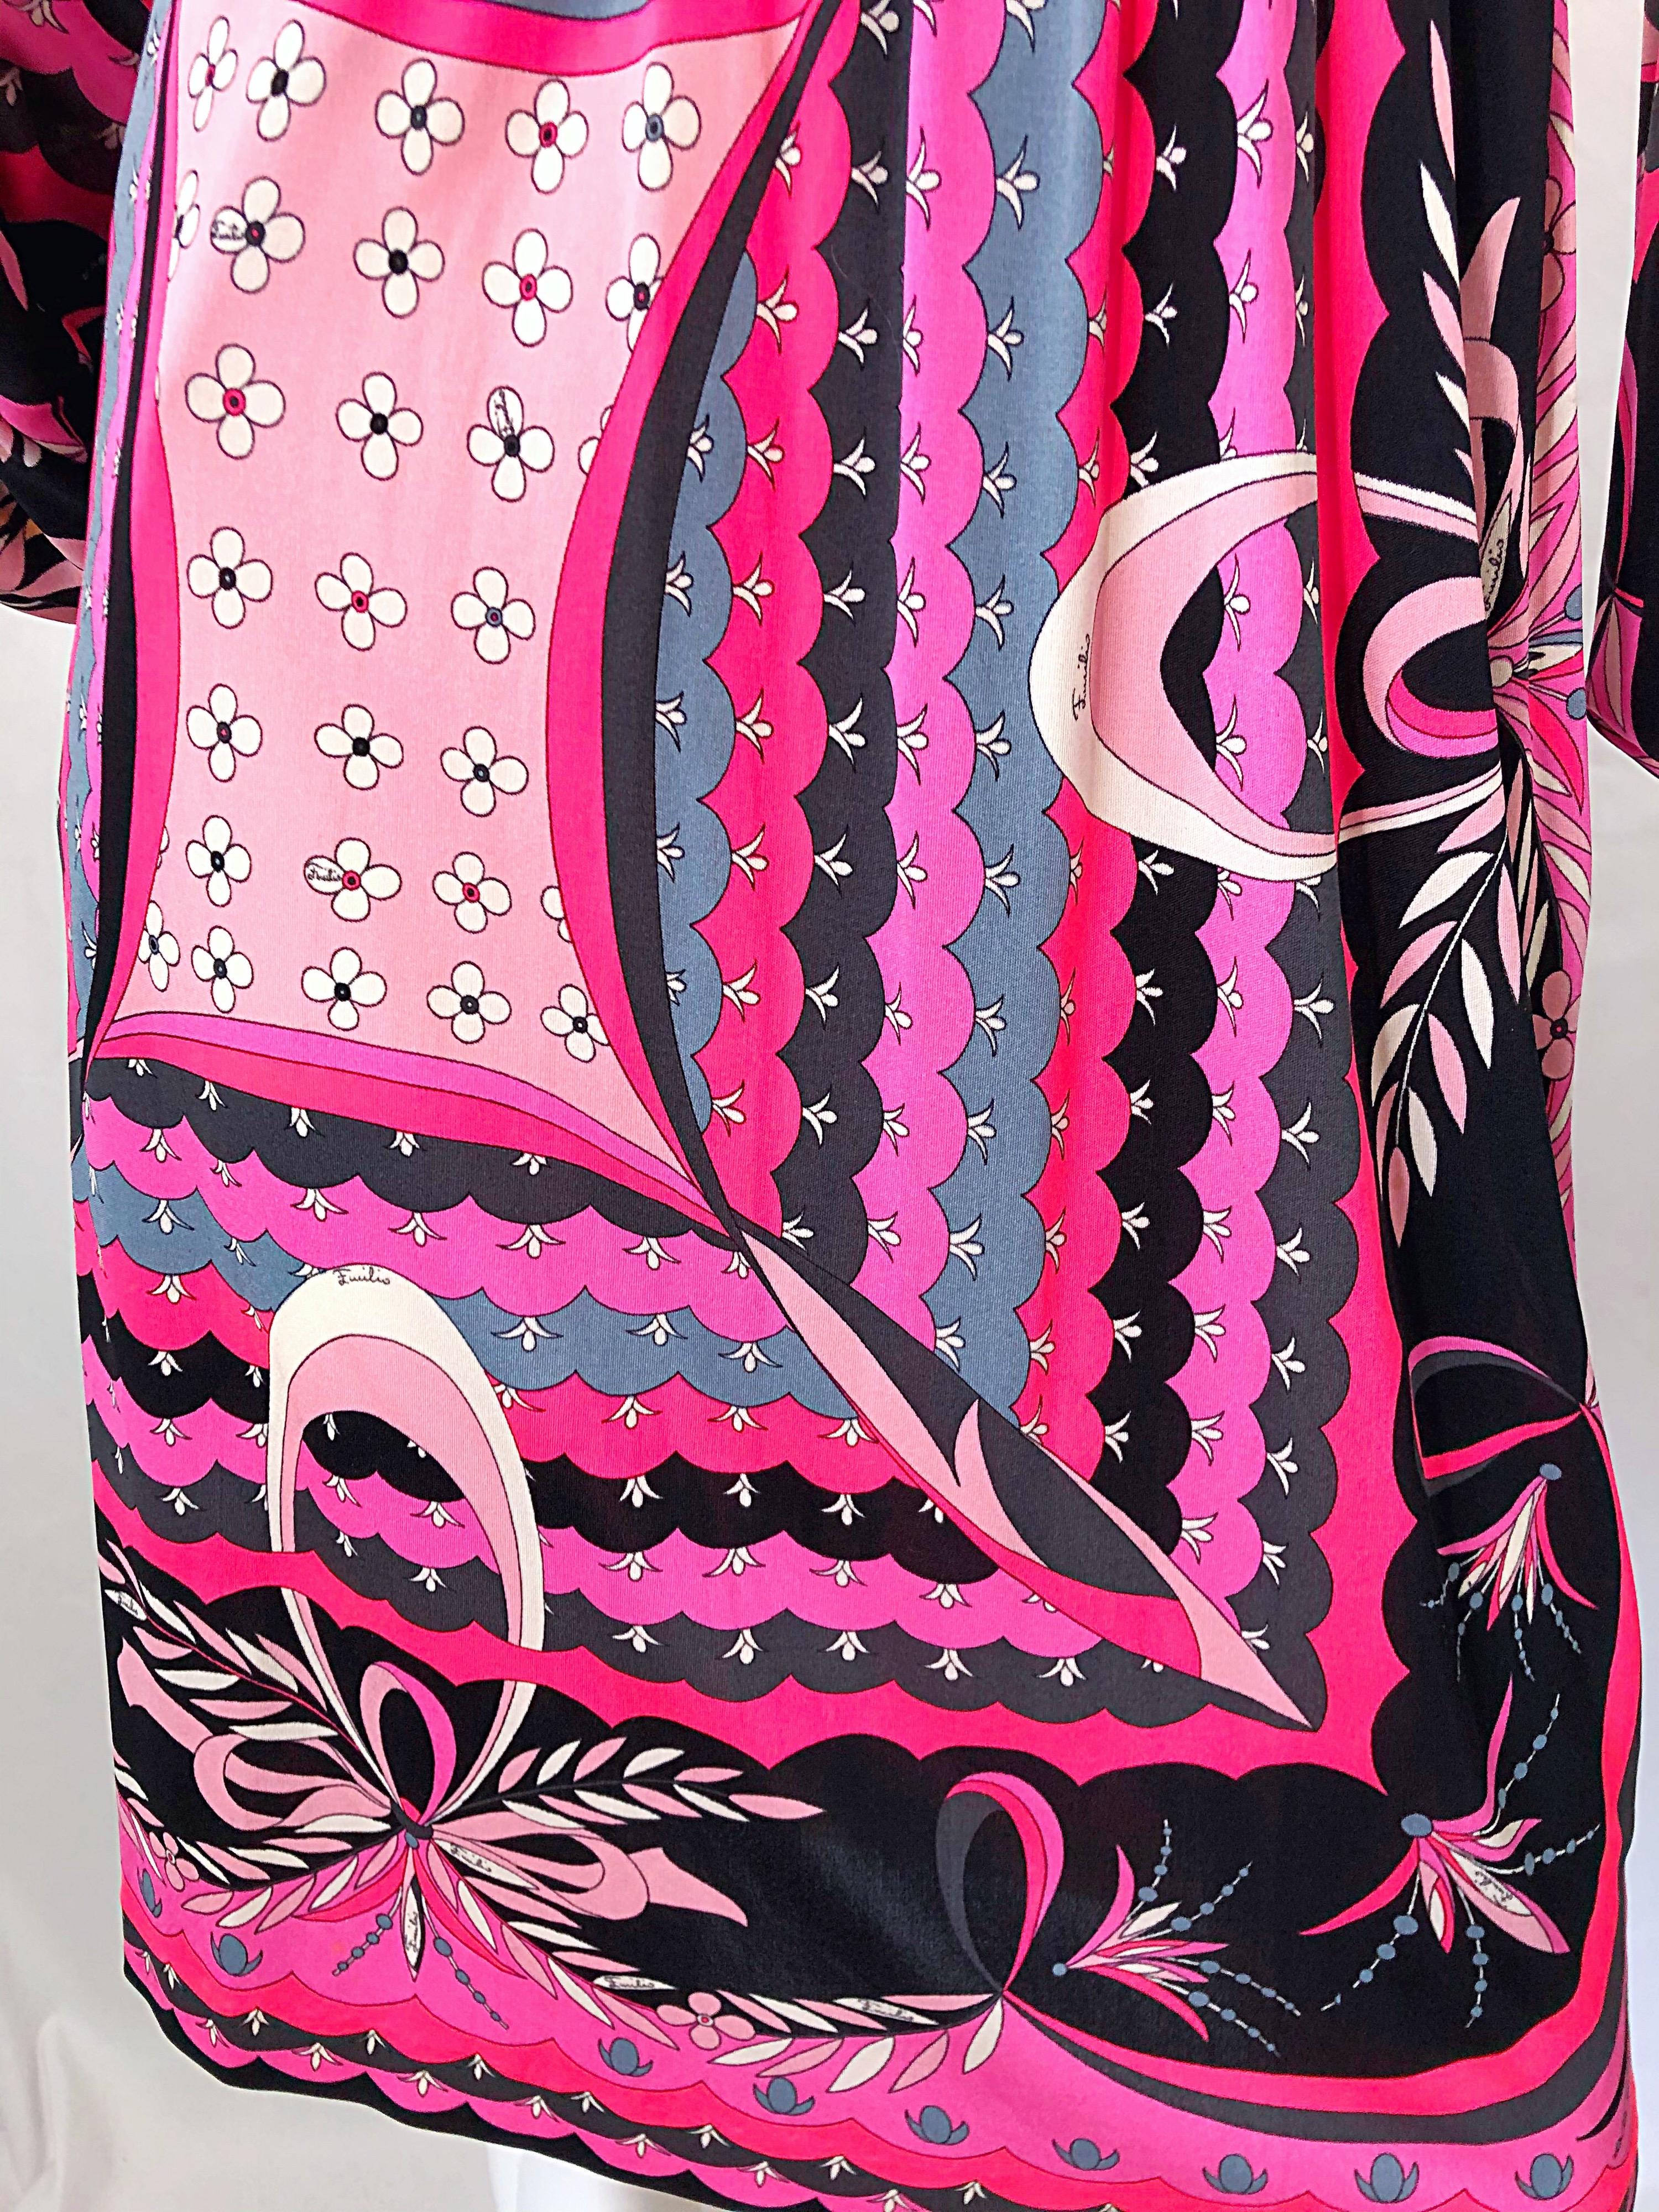 1970s Emilio Pucci Silk Jersey Hot Pink Long Sleeve Vintage 70s Dress In Excellent Condition For Sale In San Diego, CA